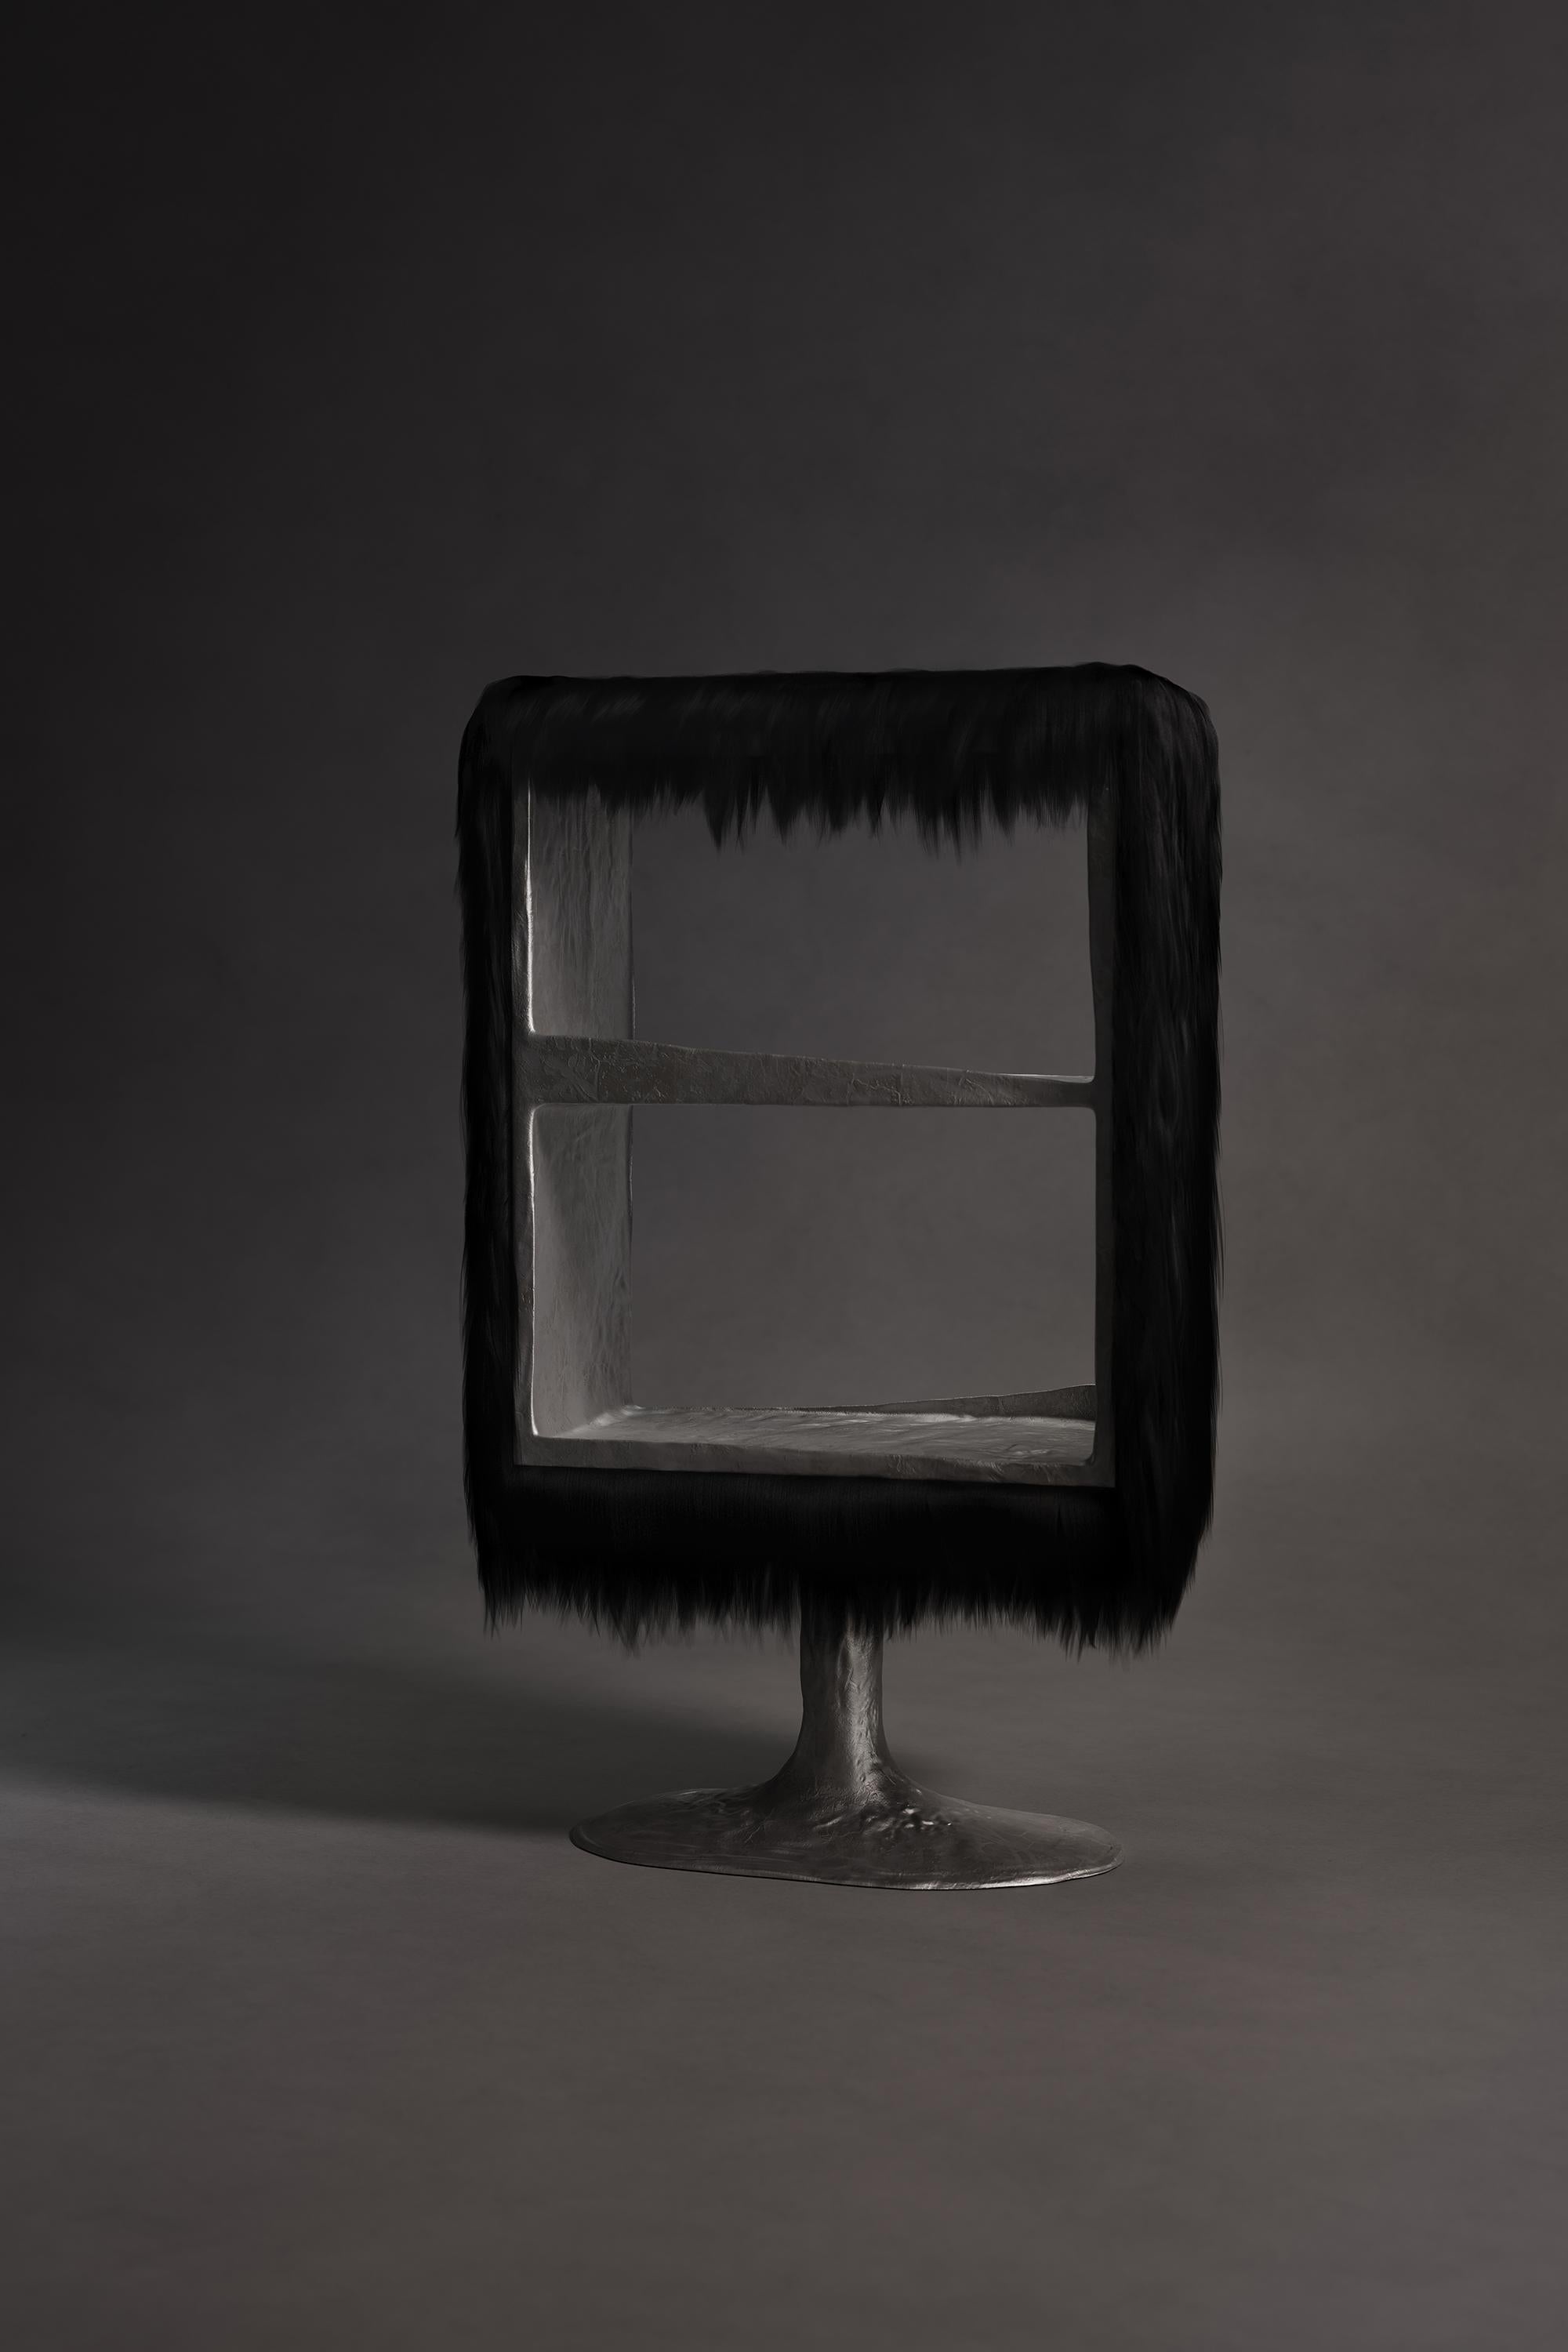 Chaos Cabinet by Atelier V&F
Limited Edition Of 8+2AP Pieces.
Dimensions: D 37 x W 86 x H 147 cm. 
Materials: Goatskin offcuts and cast aluminum.

「Chaos Cabinet」 rose and took shape from the flowing silver metal, it creates a visual impact of